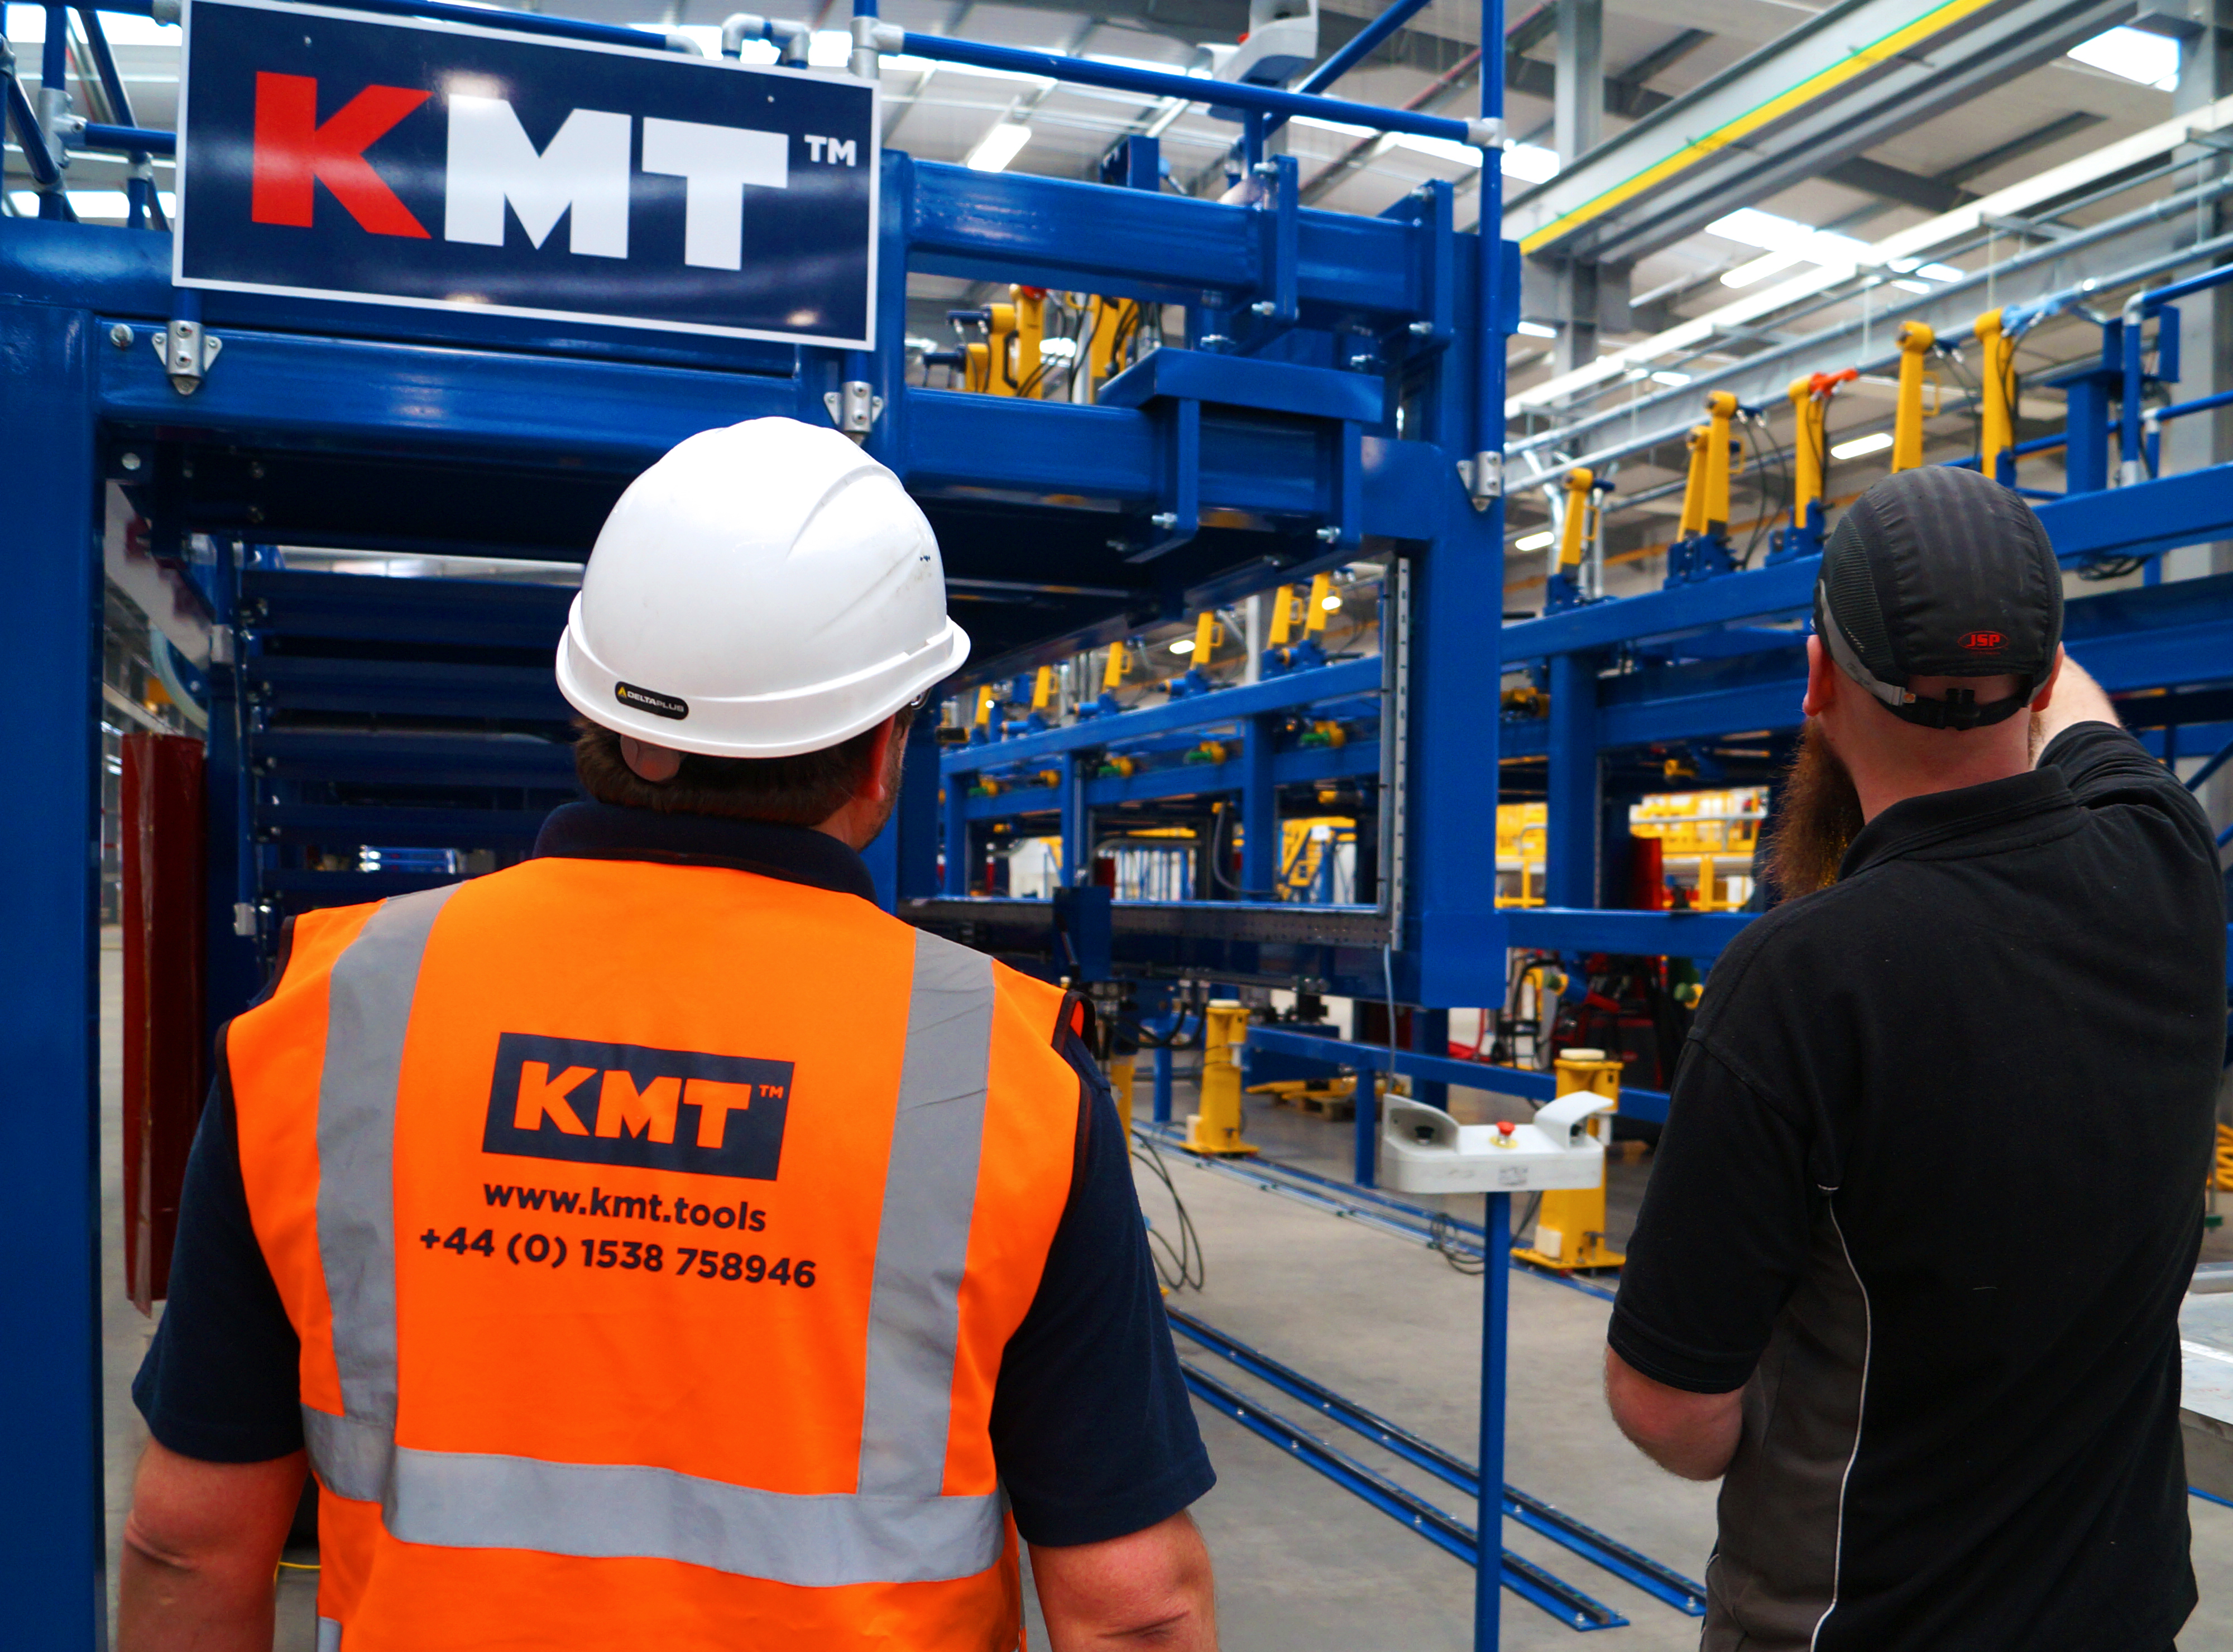 The SmartLine jigs produced by KMT for this project are entirely bespoke, designed to accommodate specific train models manufactured by Hitachi Rail.